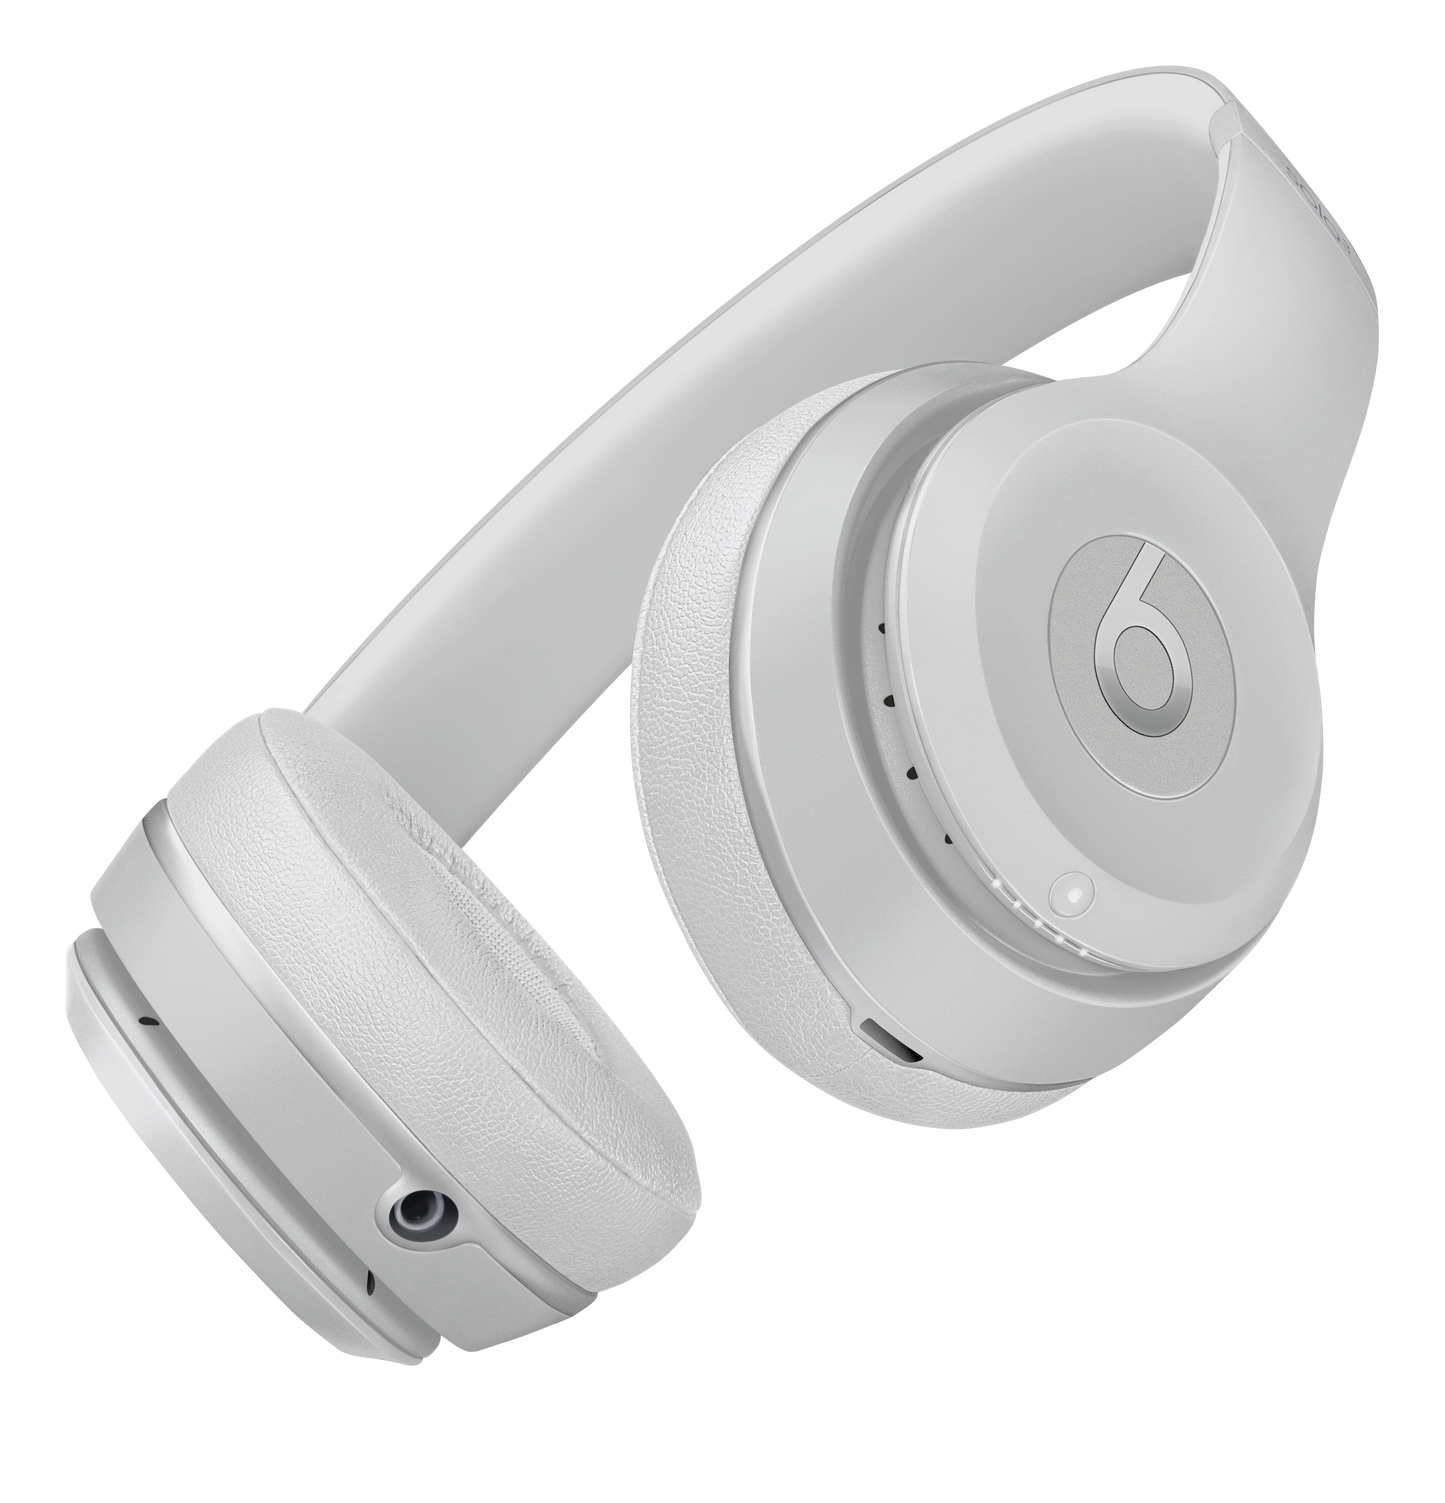 Auriculares abiertos Beats Solo3 Wireless - Plata mate - Rossellimac